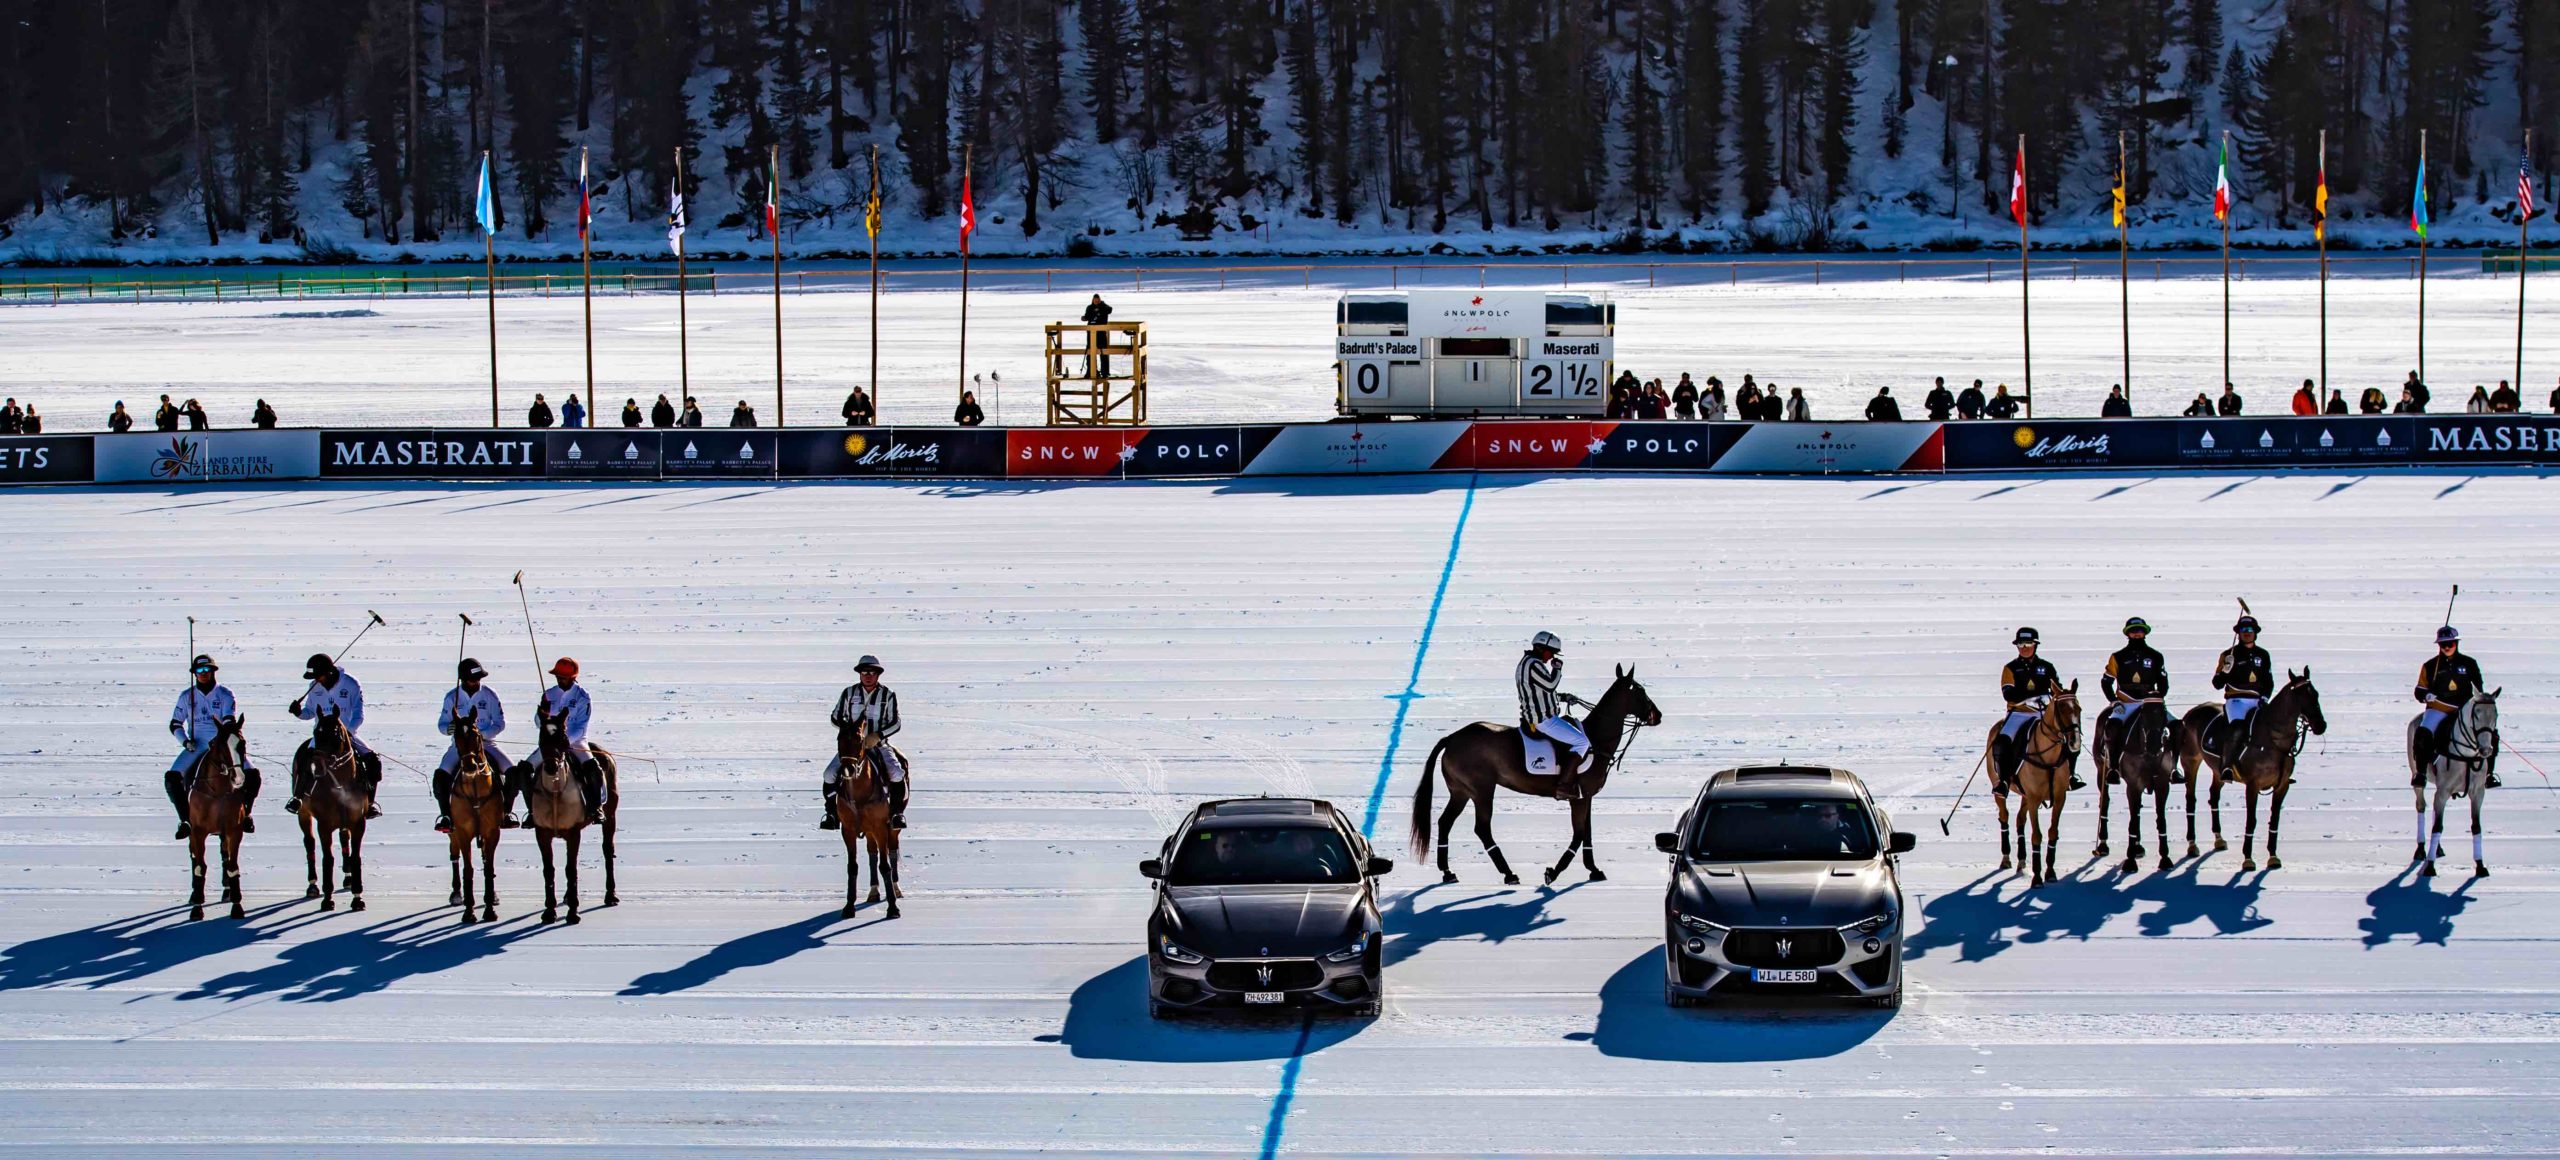 You are currently viewing Snow Polo World Cup St. Moritz 2020